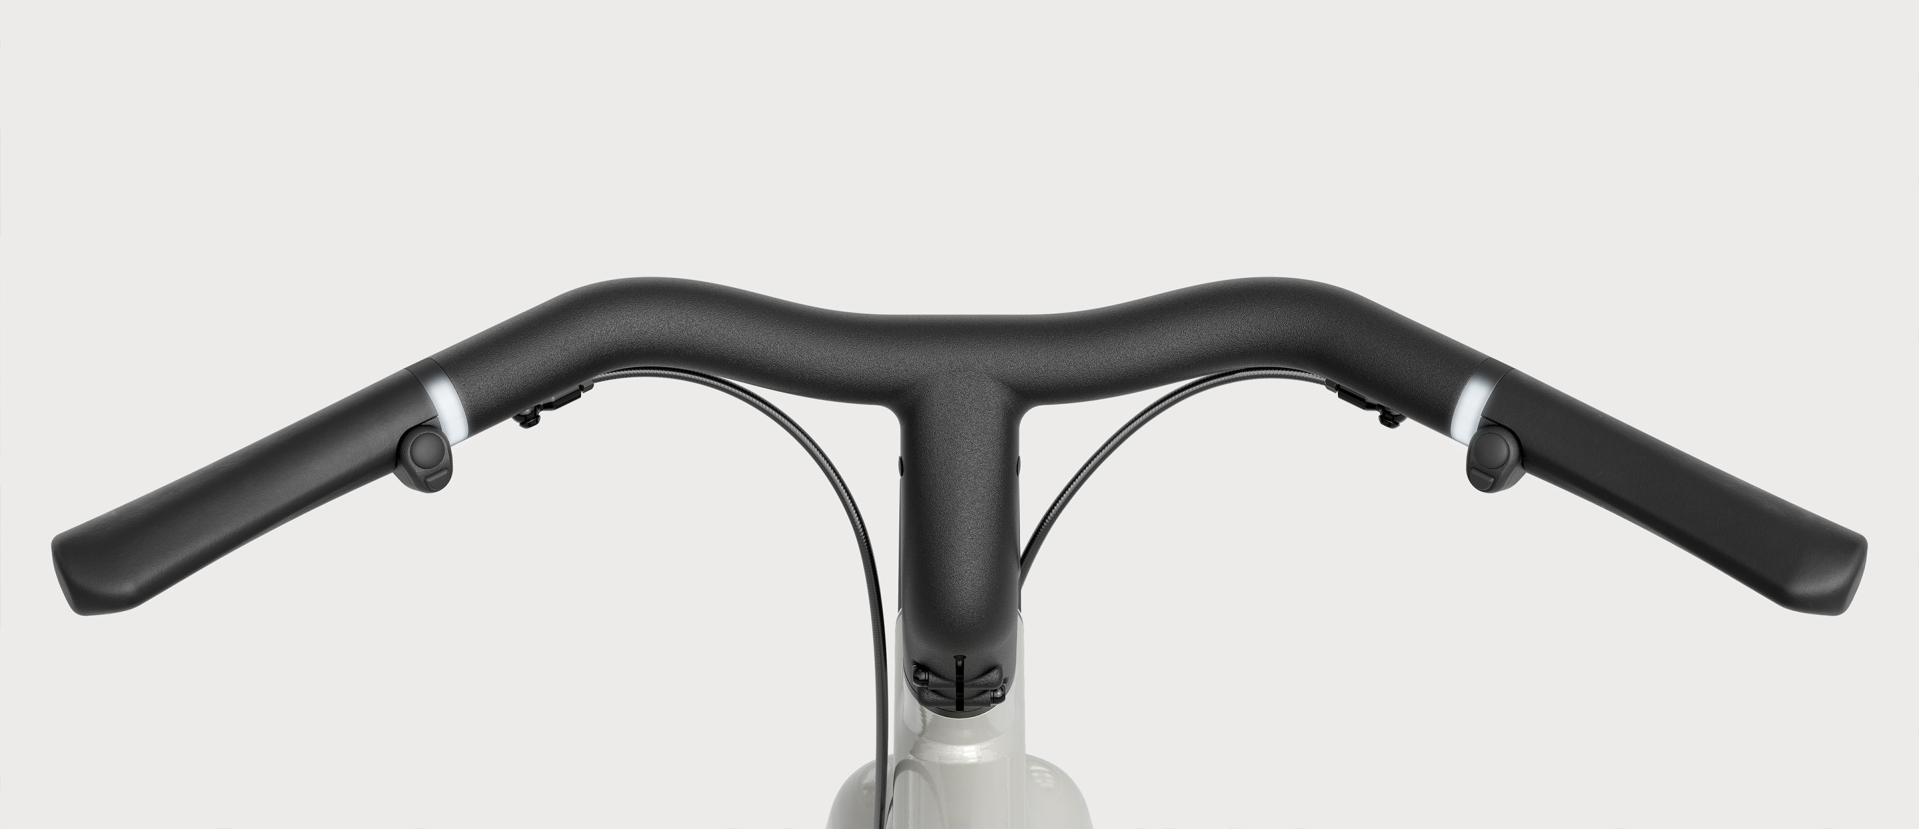 VanMoof S5 A5 Feature CGI Halo